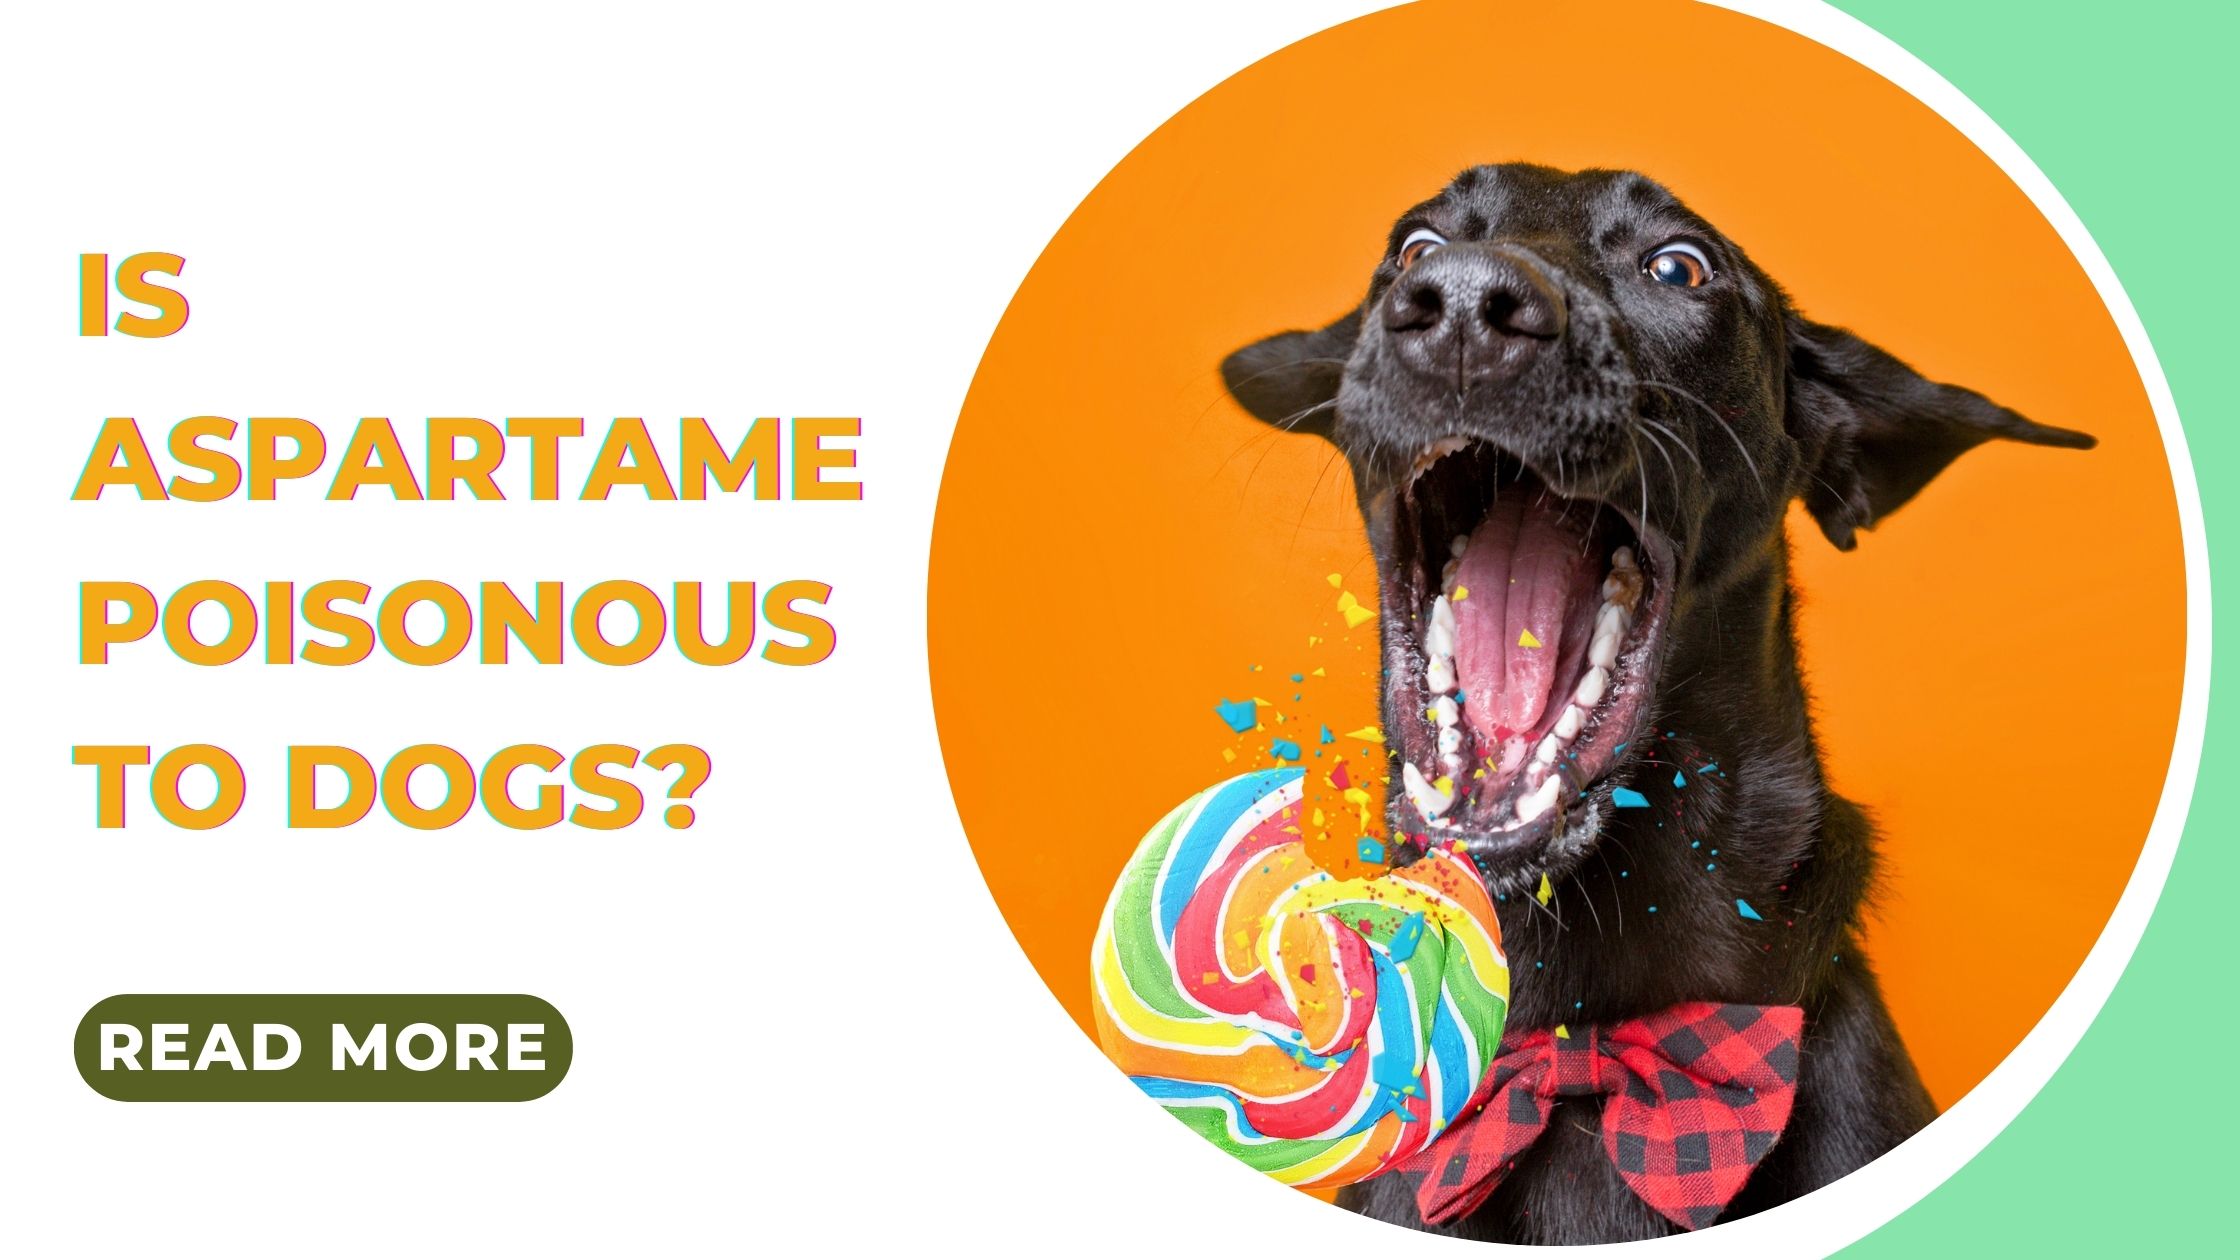 Is Aspartame Poisonous to Dogs